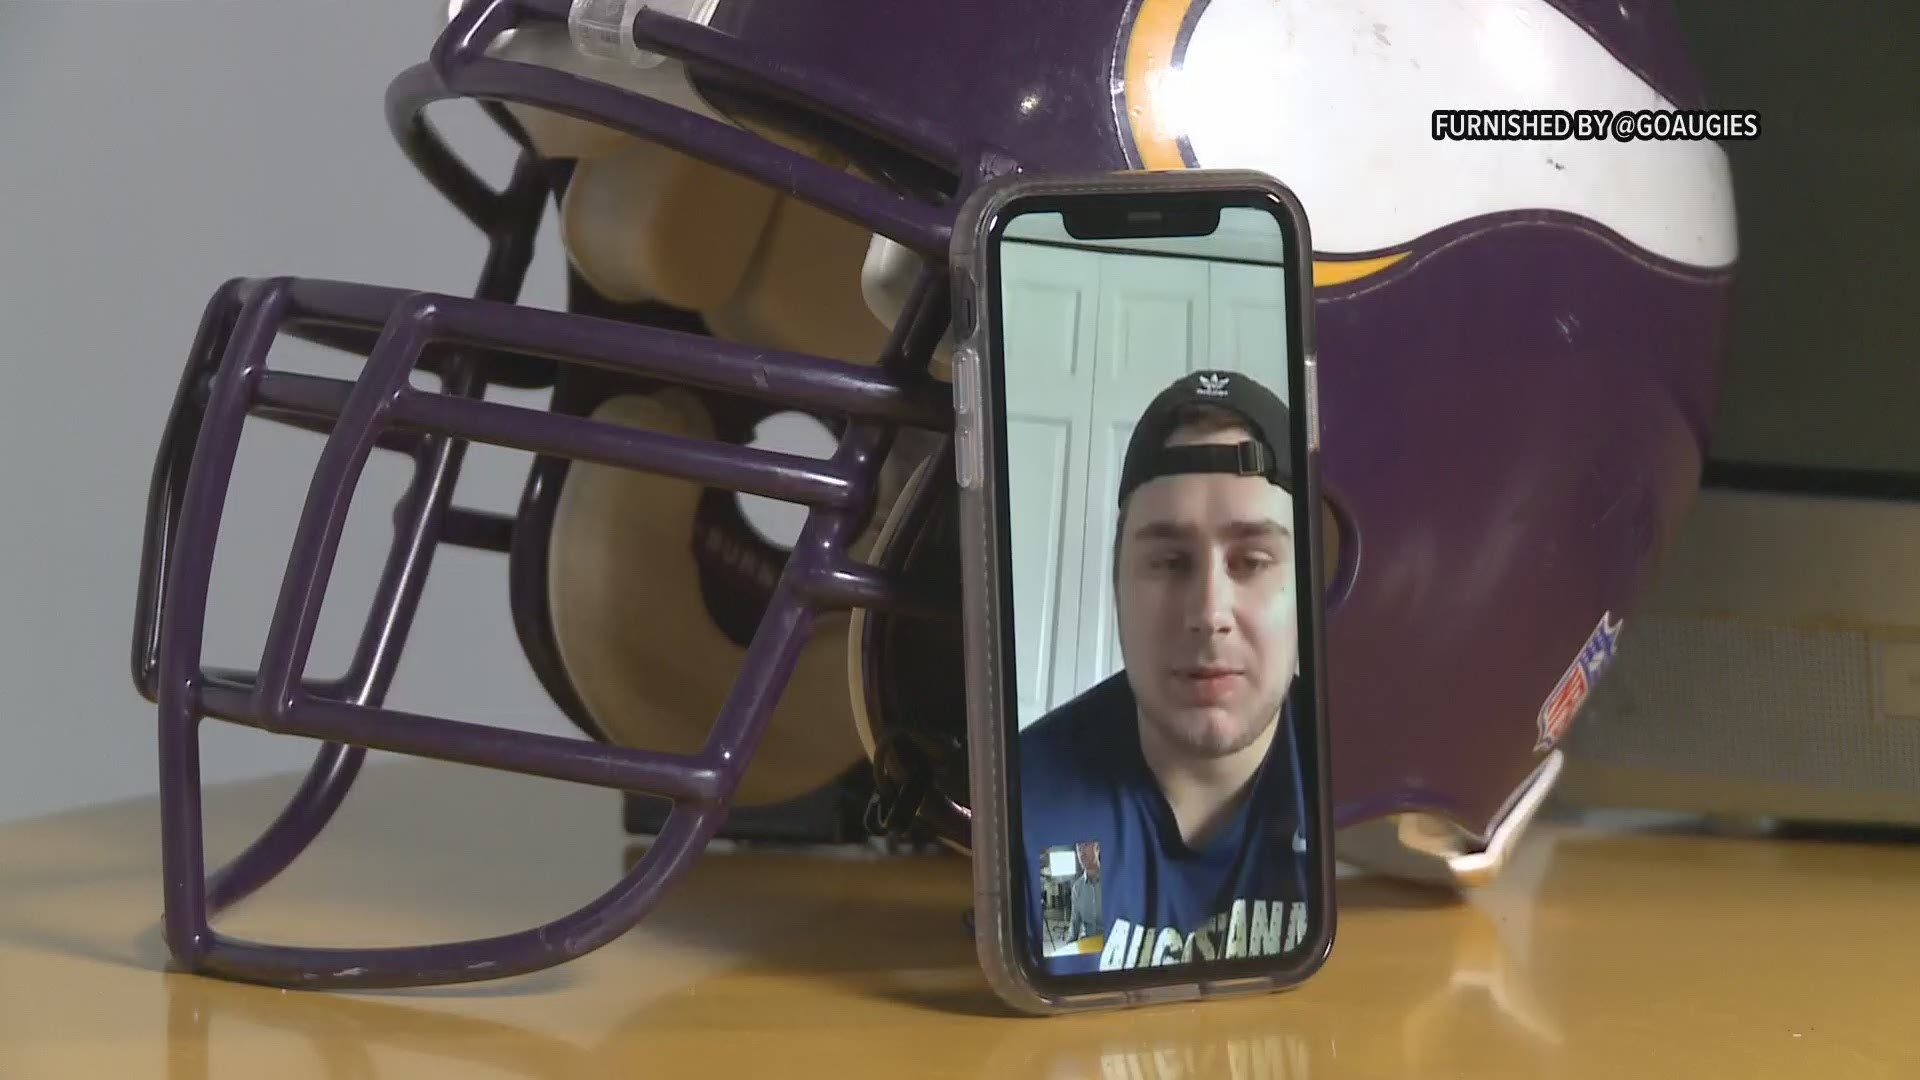 Corbin Lacina played for the Vikings from 1999-2002 and now his son Jake is getting an opportunity as an undrafted free agent.